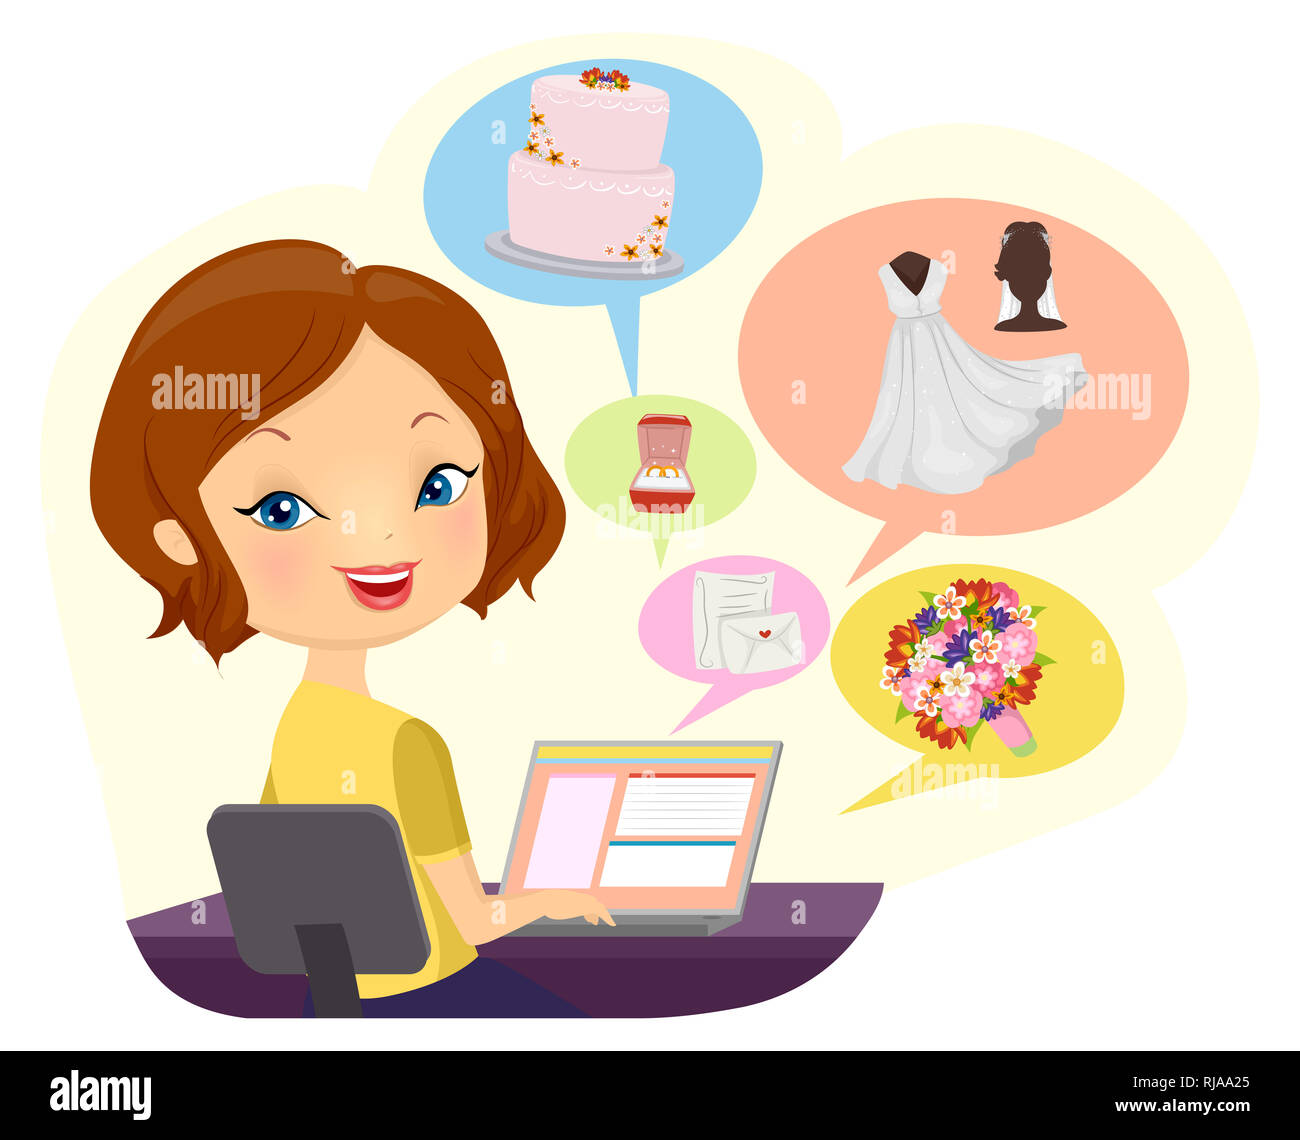 Illustration of a Girl Using Her Laptop with Wedding Icons from Cake, Rings, Invitation, Gown and Bouquet Stock Photo